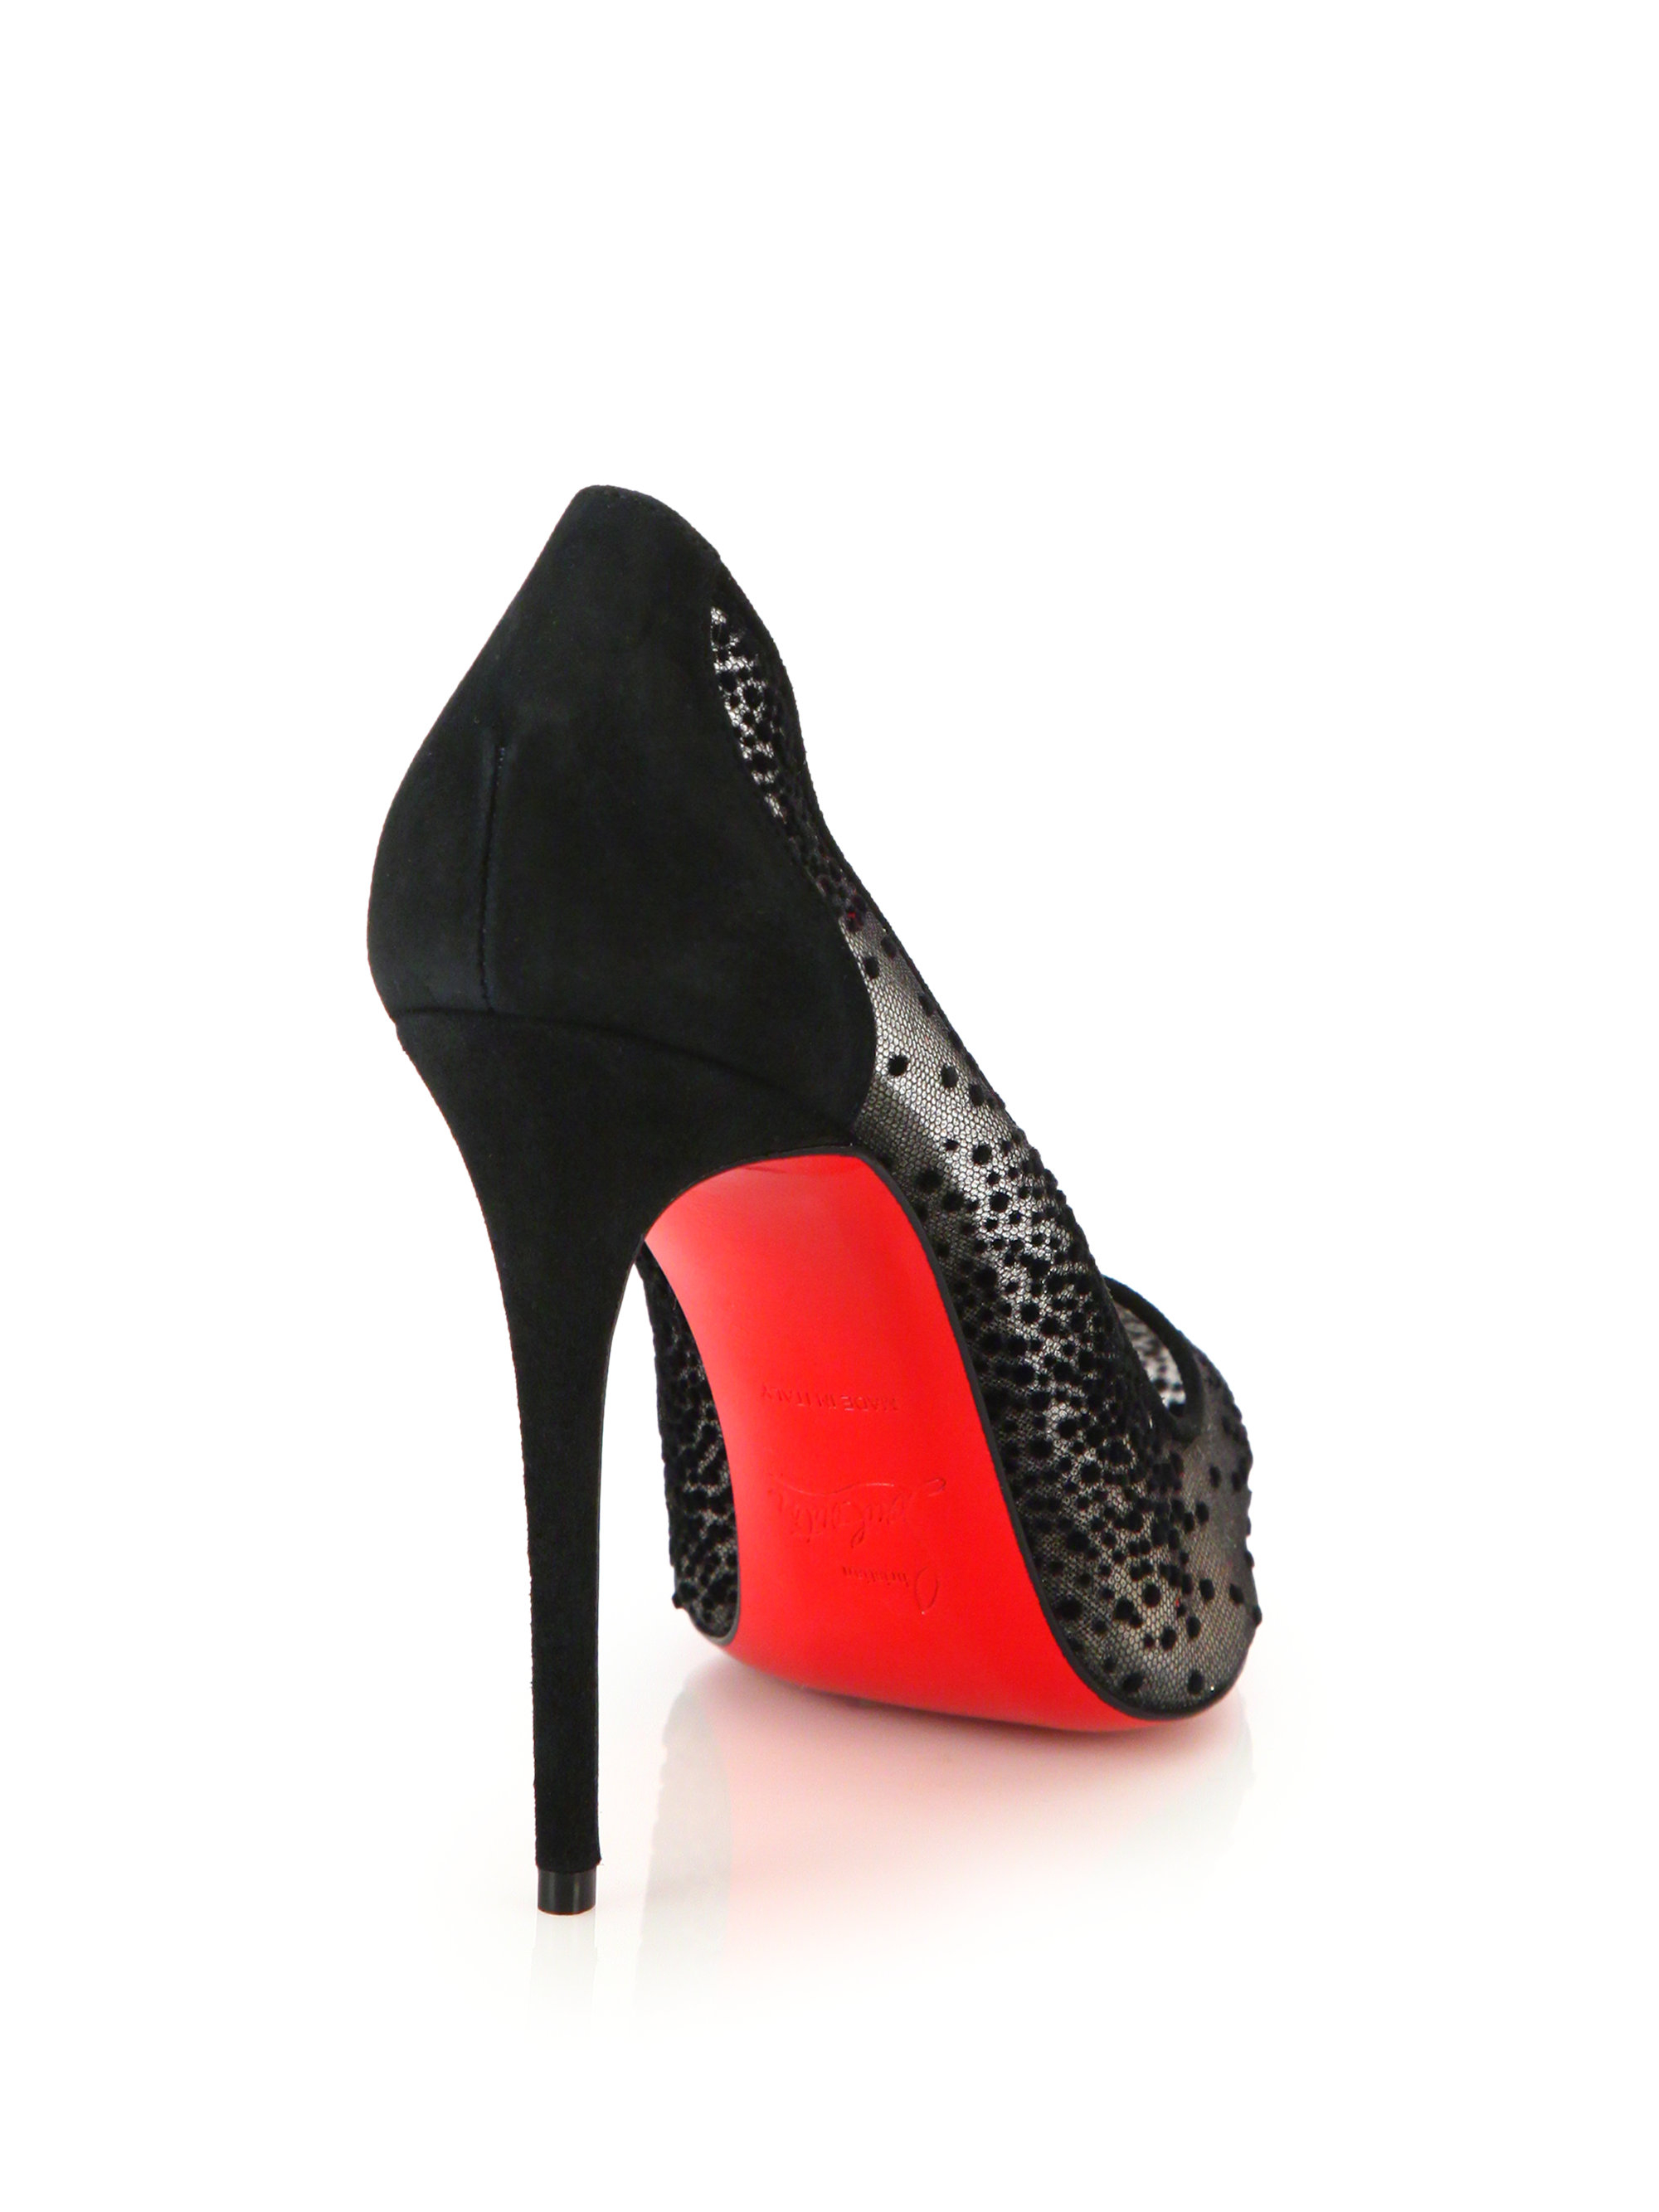 spikes shoes for men - Christian louboutin Follies Velvet-dotted Mesh Pumps in Black | Lyst